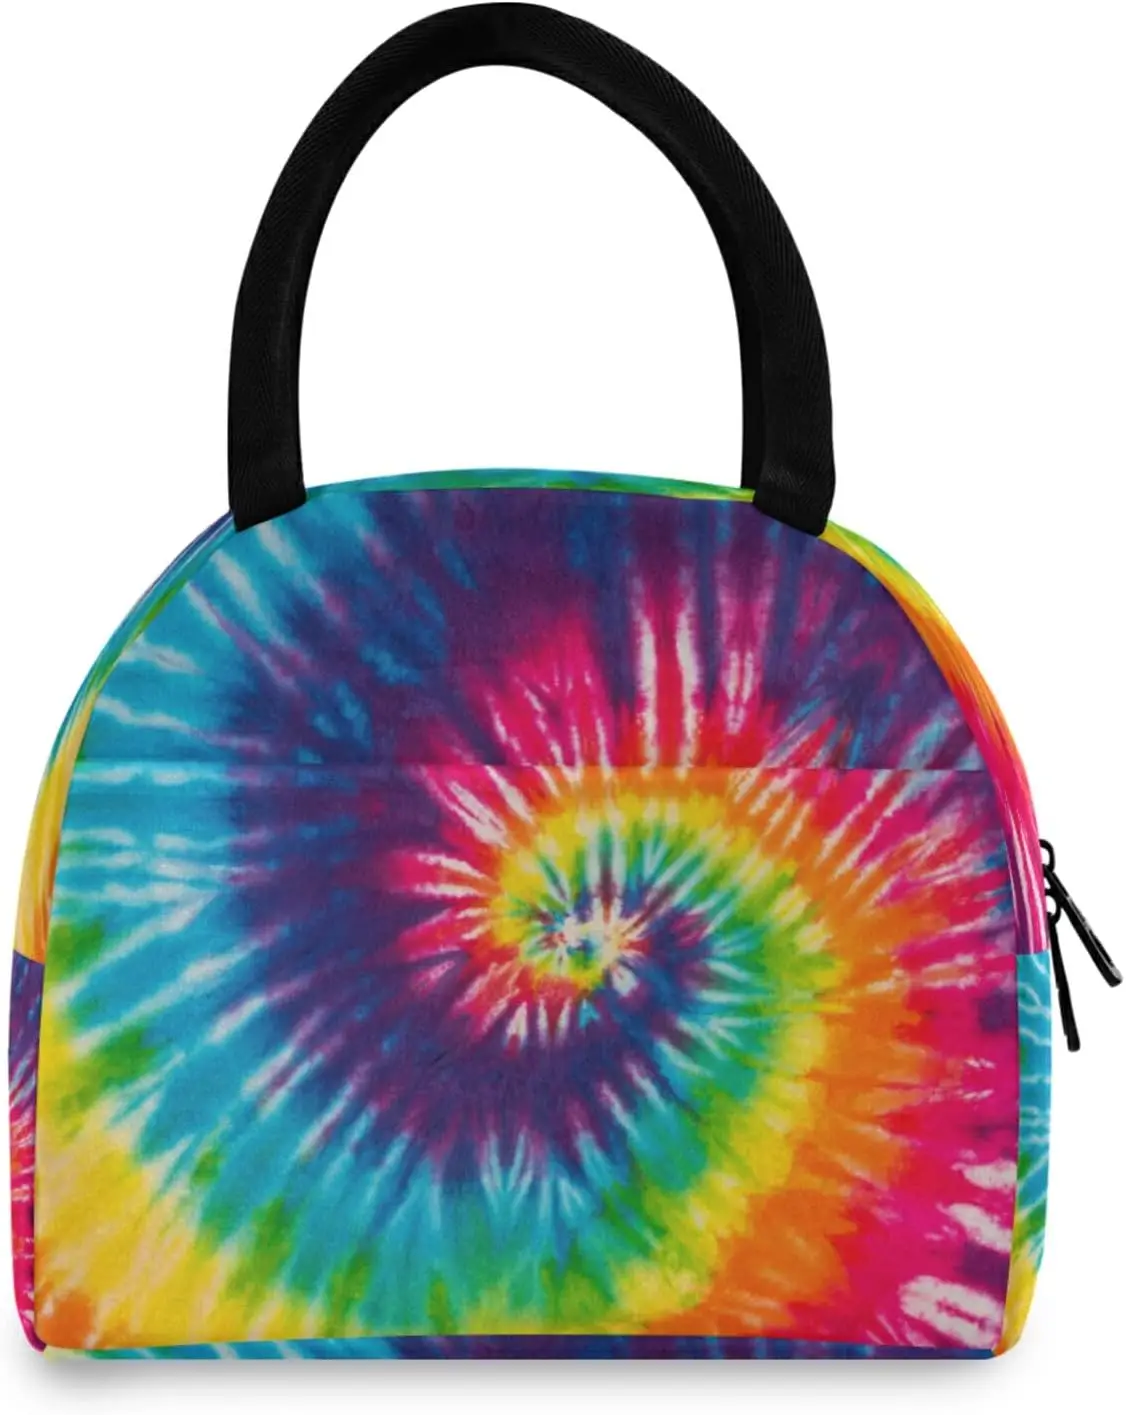 

Abstract Swirl Tie Dye Rainbow Lunch Bag Box for Women Men Insulated Lunchbox Portable Tote Organizer Reusable Zipper